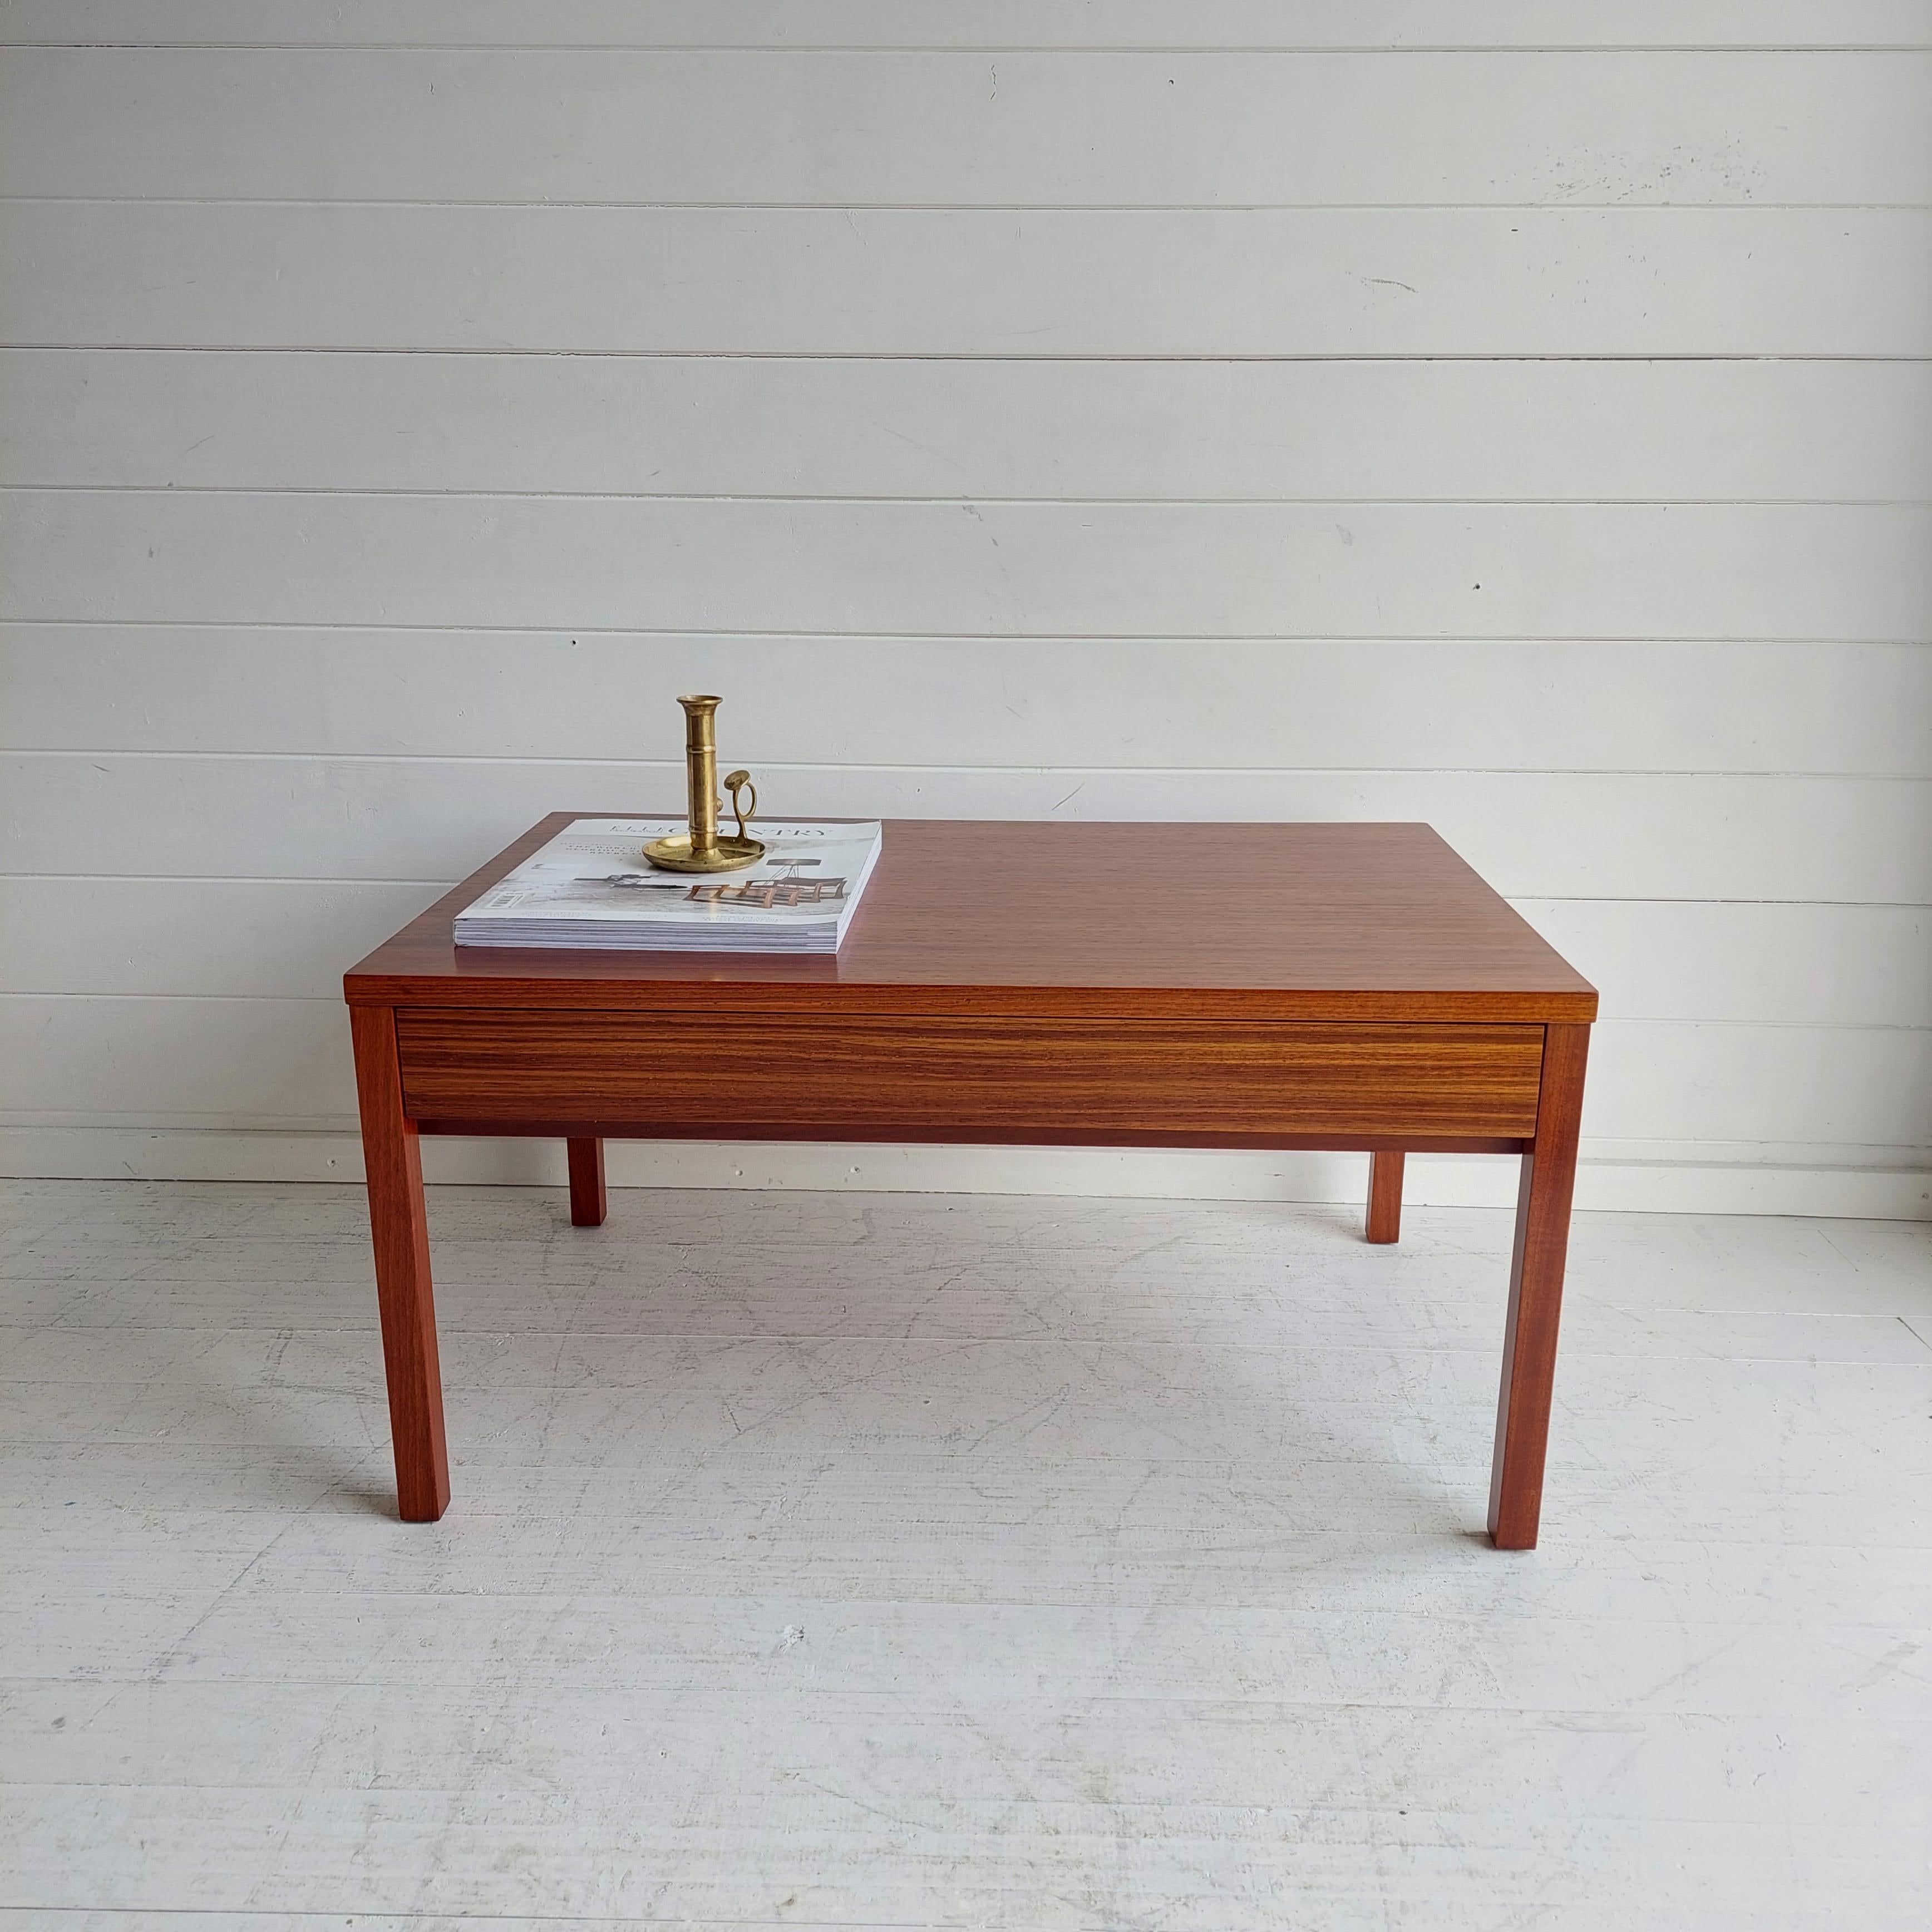 An original vintage 1960s/70s teak coffee table with tray by Meredew. 

Very practical piece with simple and elegant lines.
A stunning coffee table or side tale by British maker Meredew. 
Made in teak, with abeatiful rich tone.

This teak